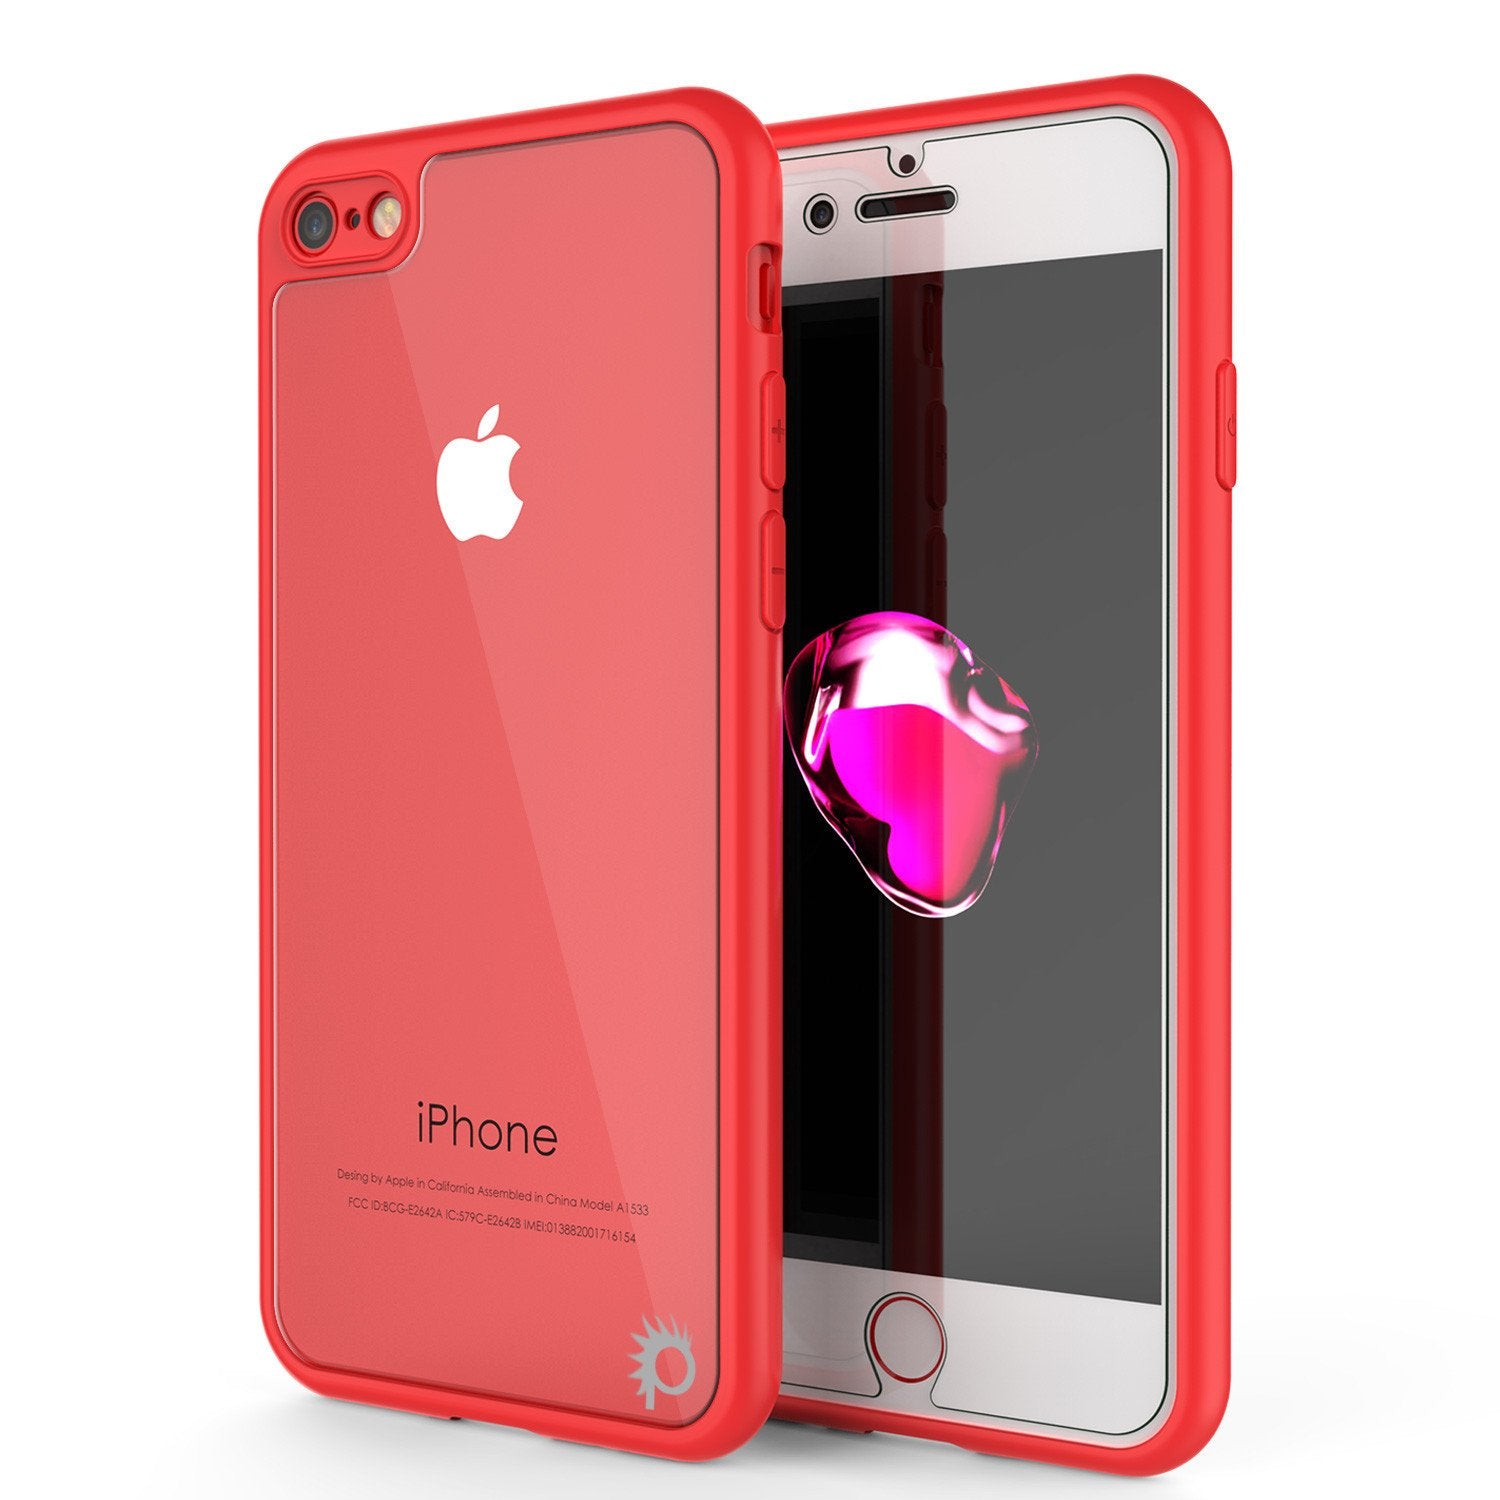 iPhone 7 Case, Punkcase [MASK Series] [RED] Full Body Hybrid Dual Layer TPU Cover [Clear Back] [Non Slip] [Ultra Thin Fit] W/ protective Tempered Glass Screen Protector for Apple iPhone 7S